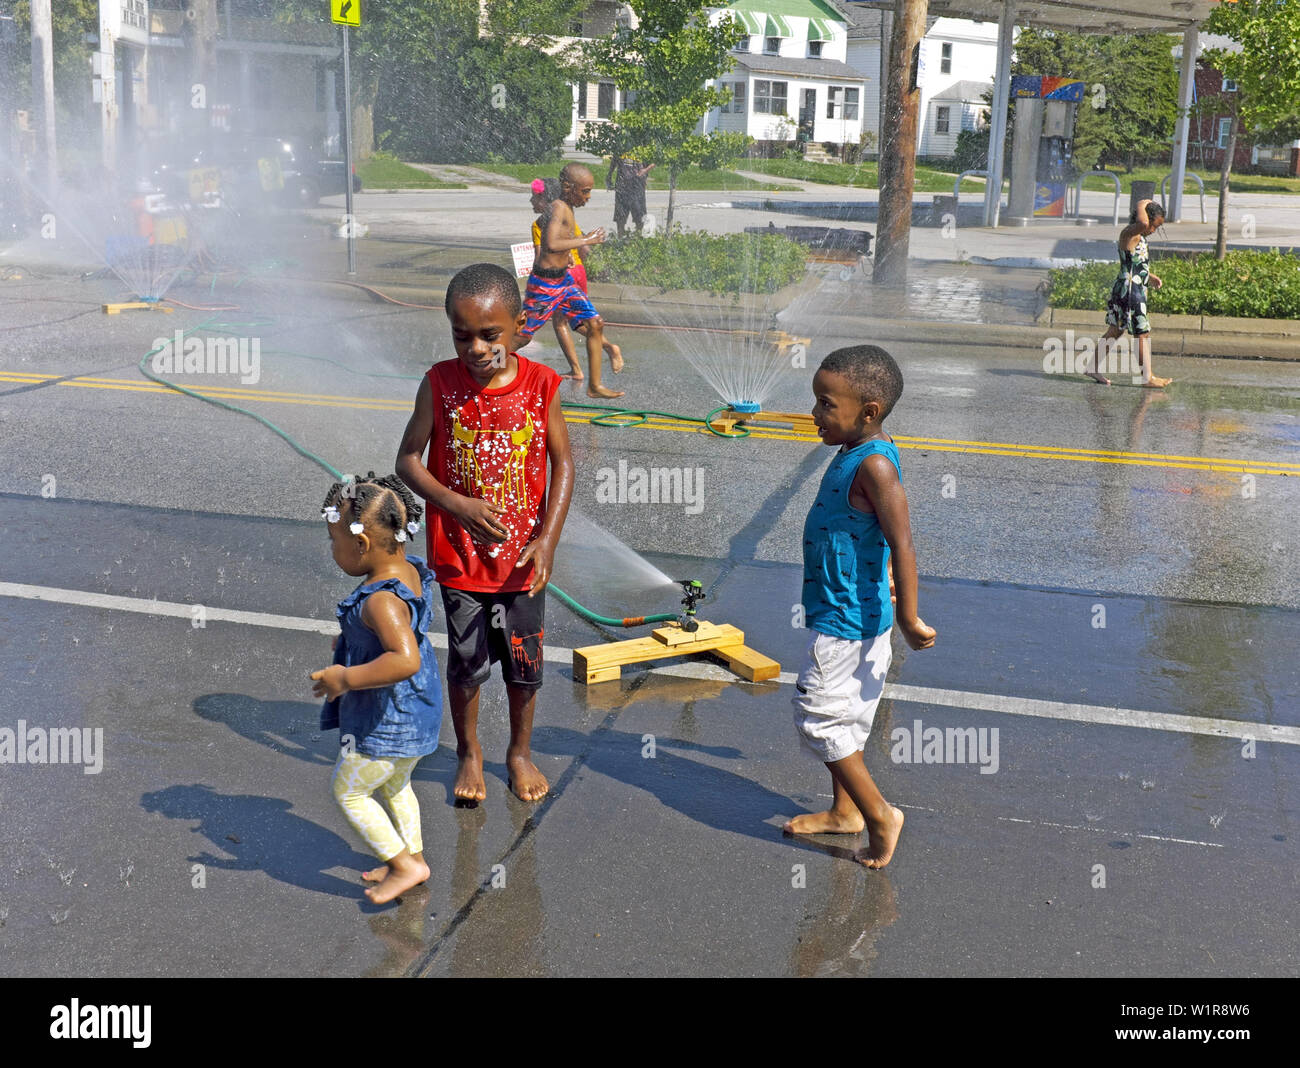 Children cool off in the street under water sprinklers set up to beat the oppressive summer heat in Cleveland, Ohio, USA. Stock Photo